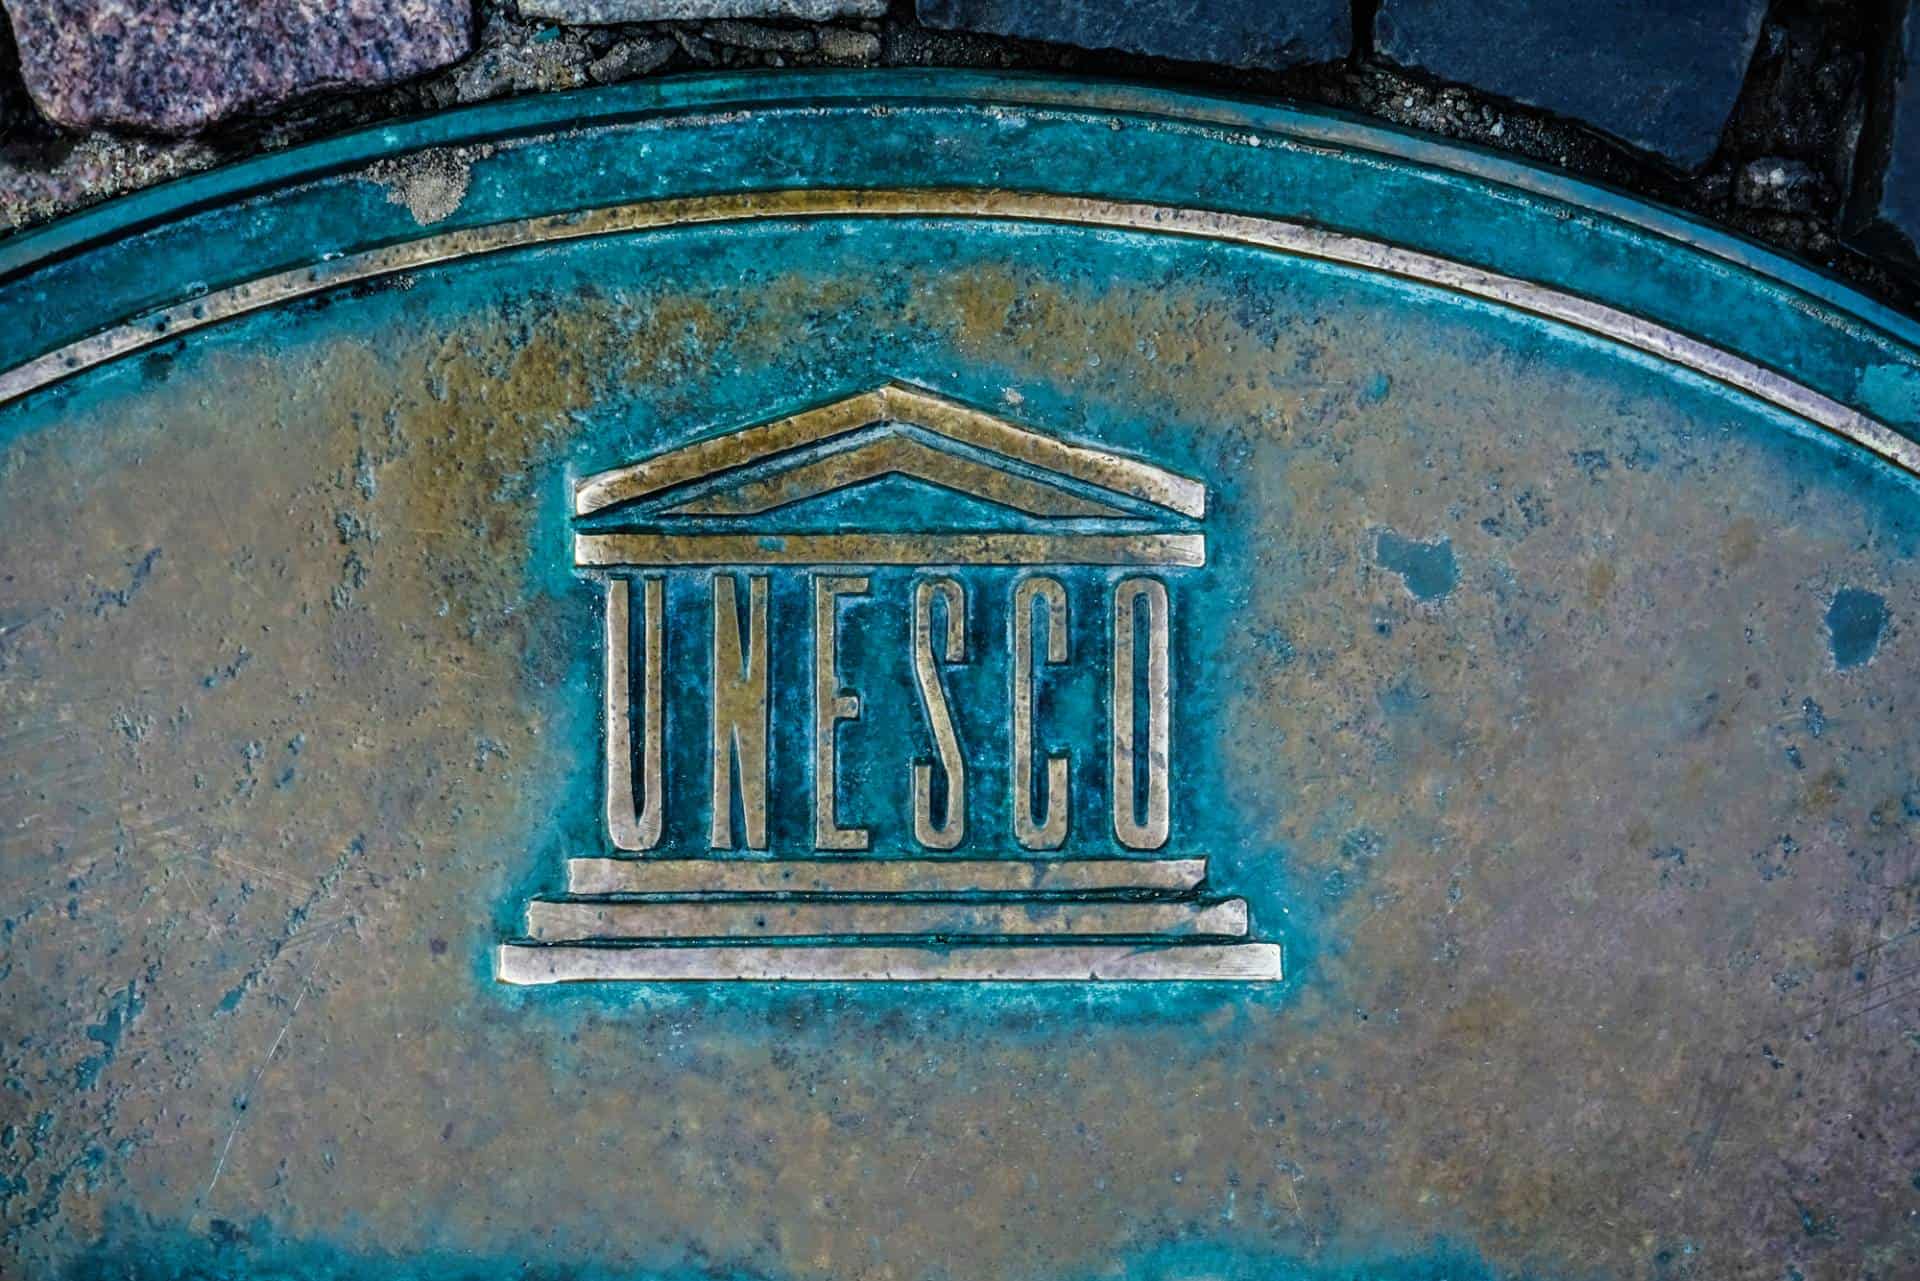 What does UNESCO stand for?